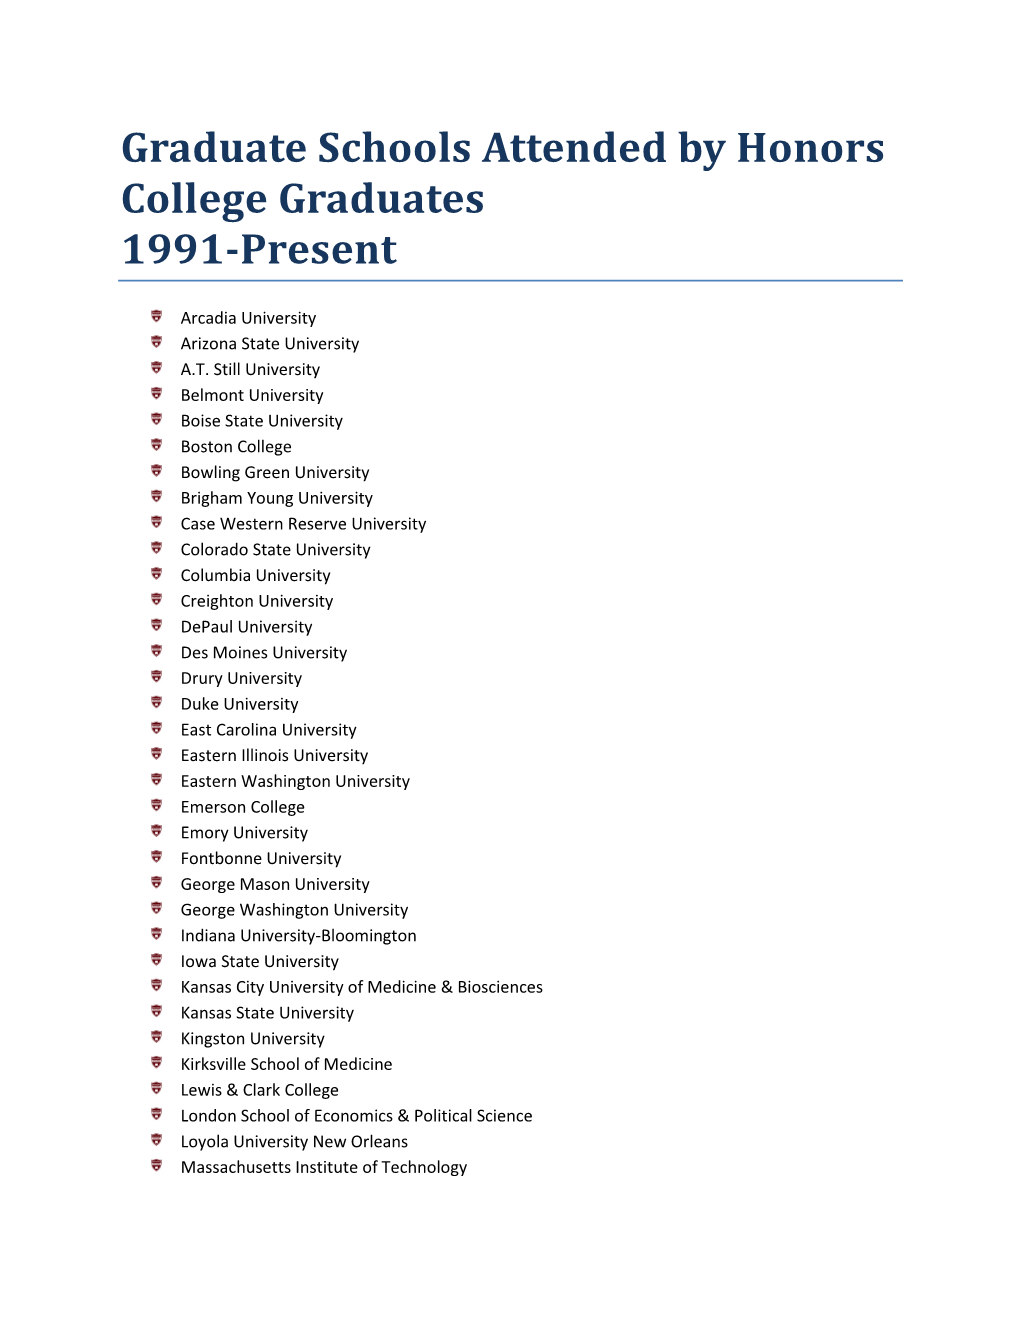 Graduate Schools Attended by Honors College Graduates 1991-Present